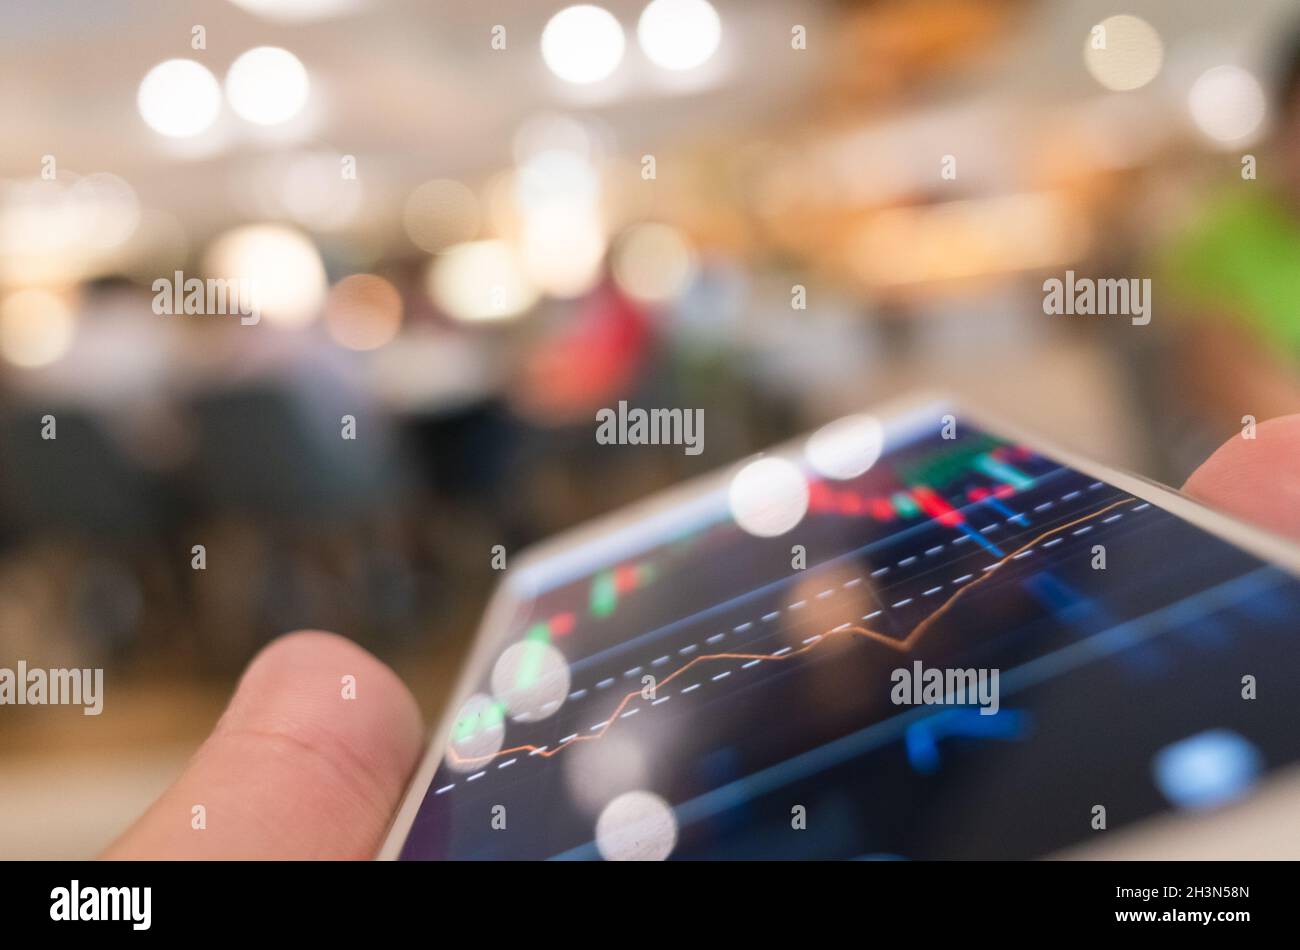 Using a mobile device to check market data Stock Photo